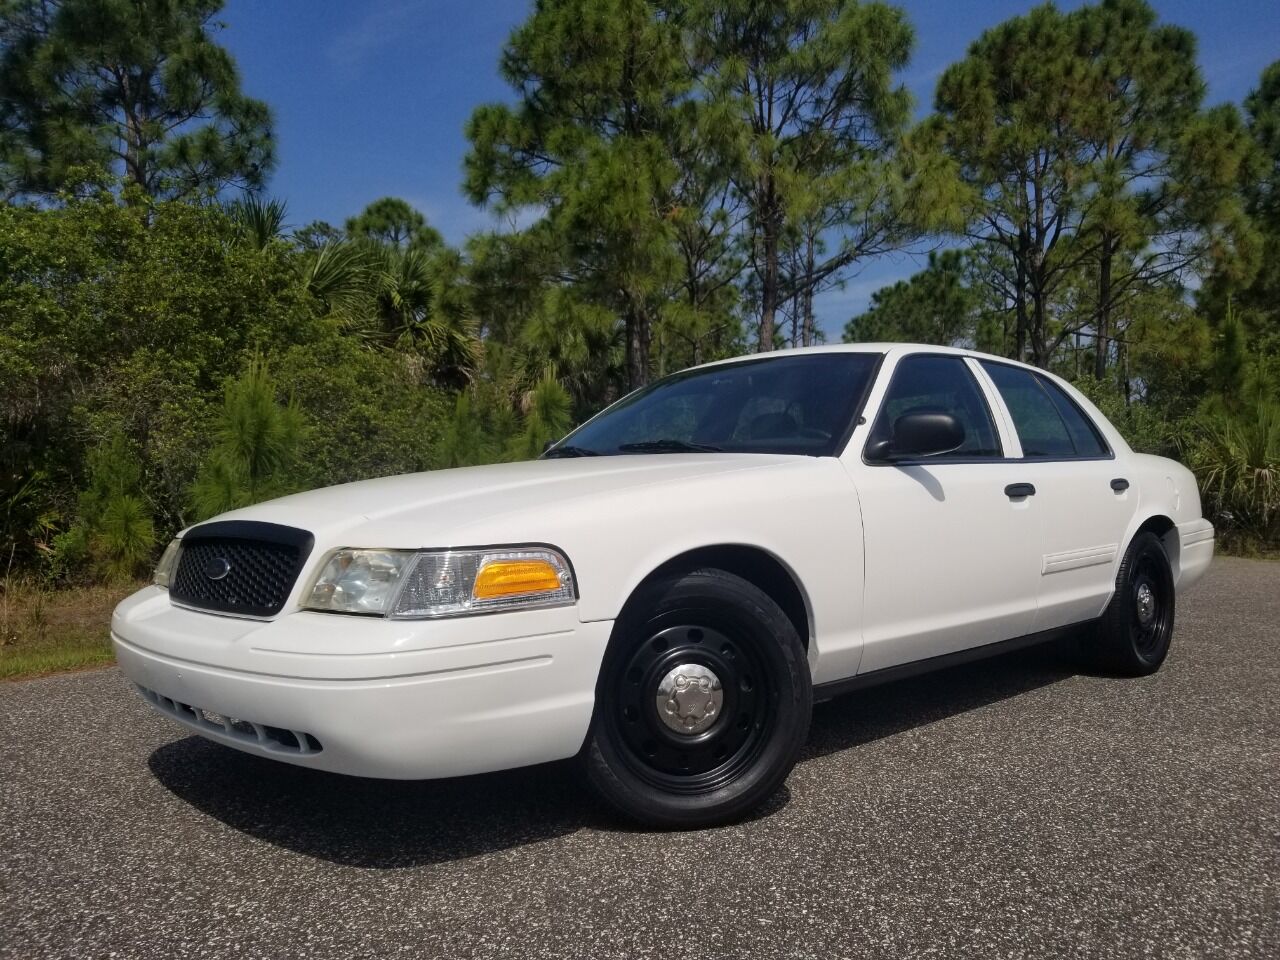 2010 Ford Crown Victoria For Sale - Carsforsale.com®